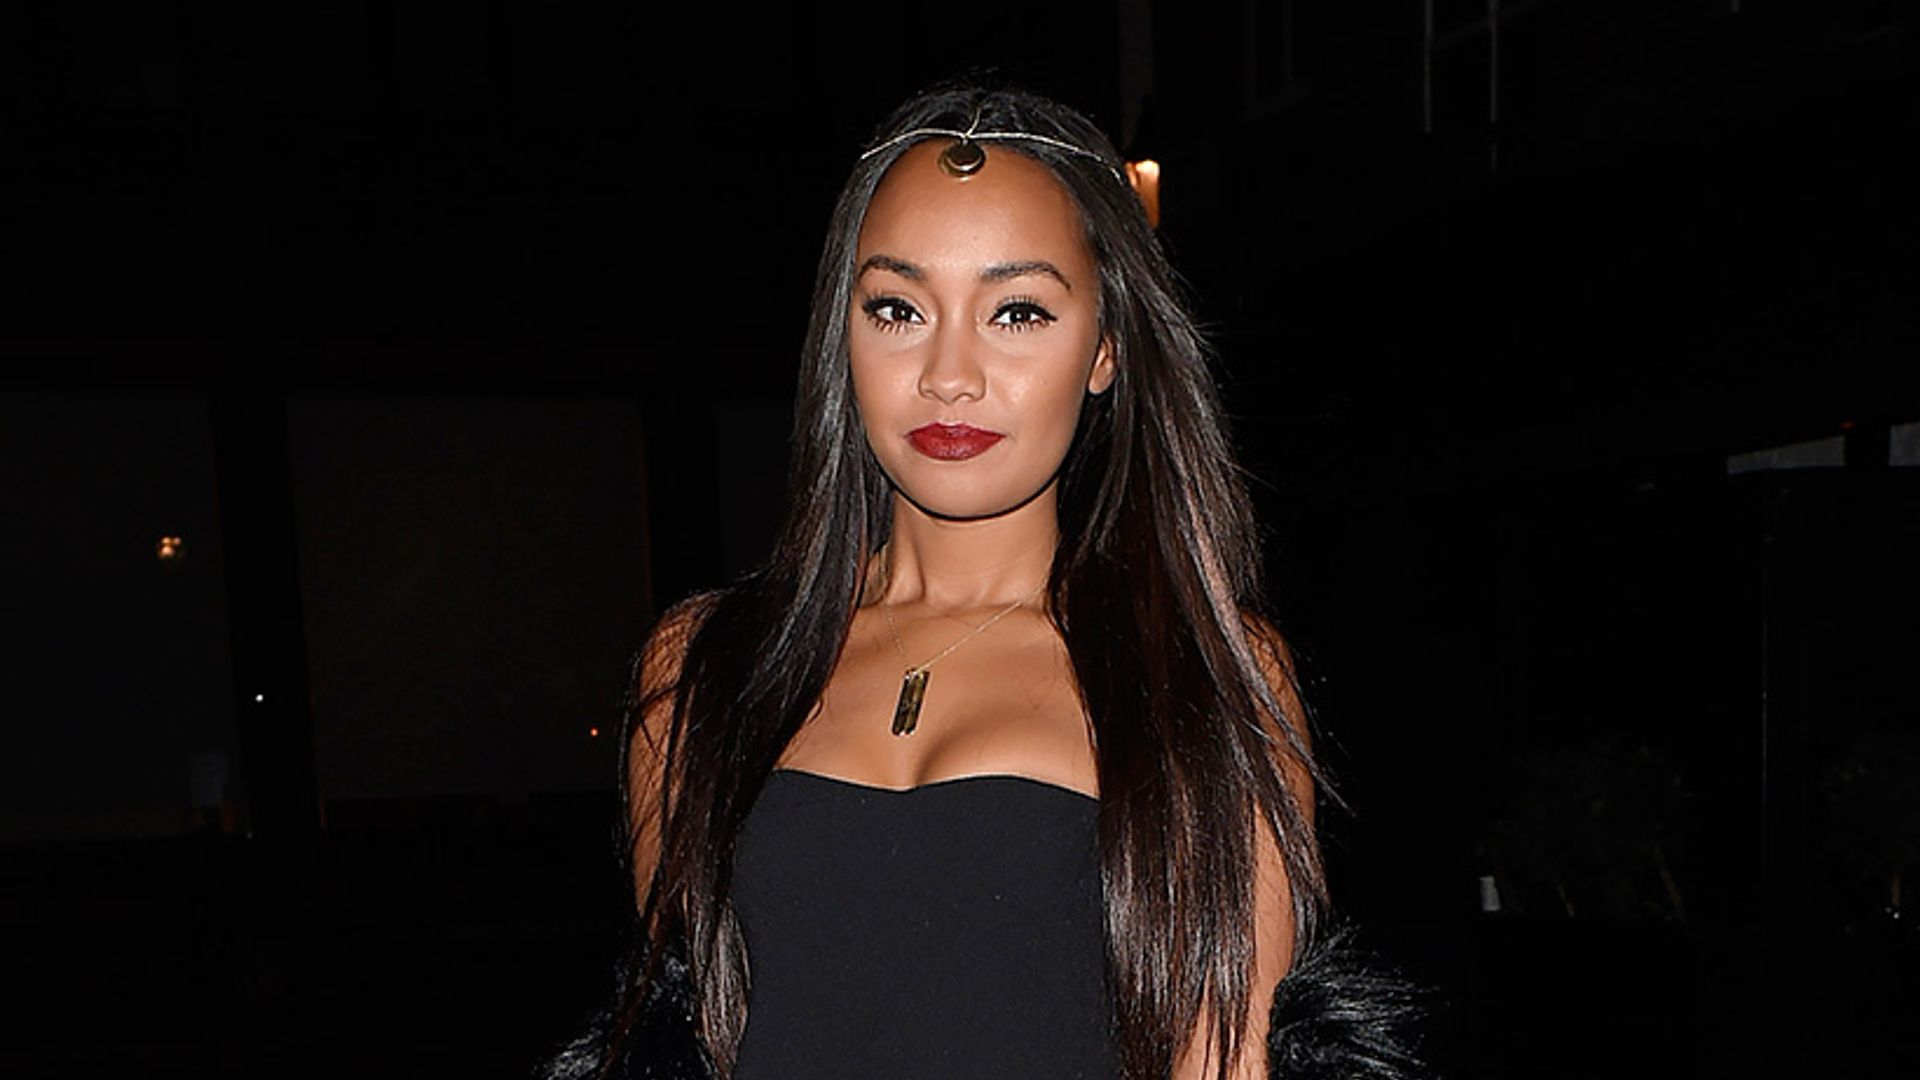 Man who attacked Leigh-Anne Pinnock given restraining 